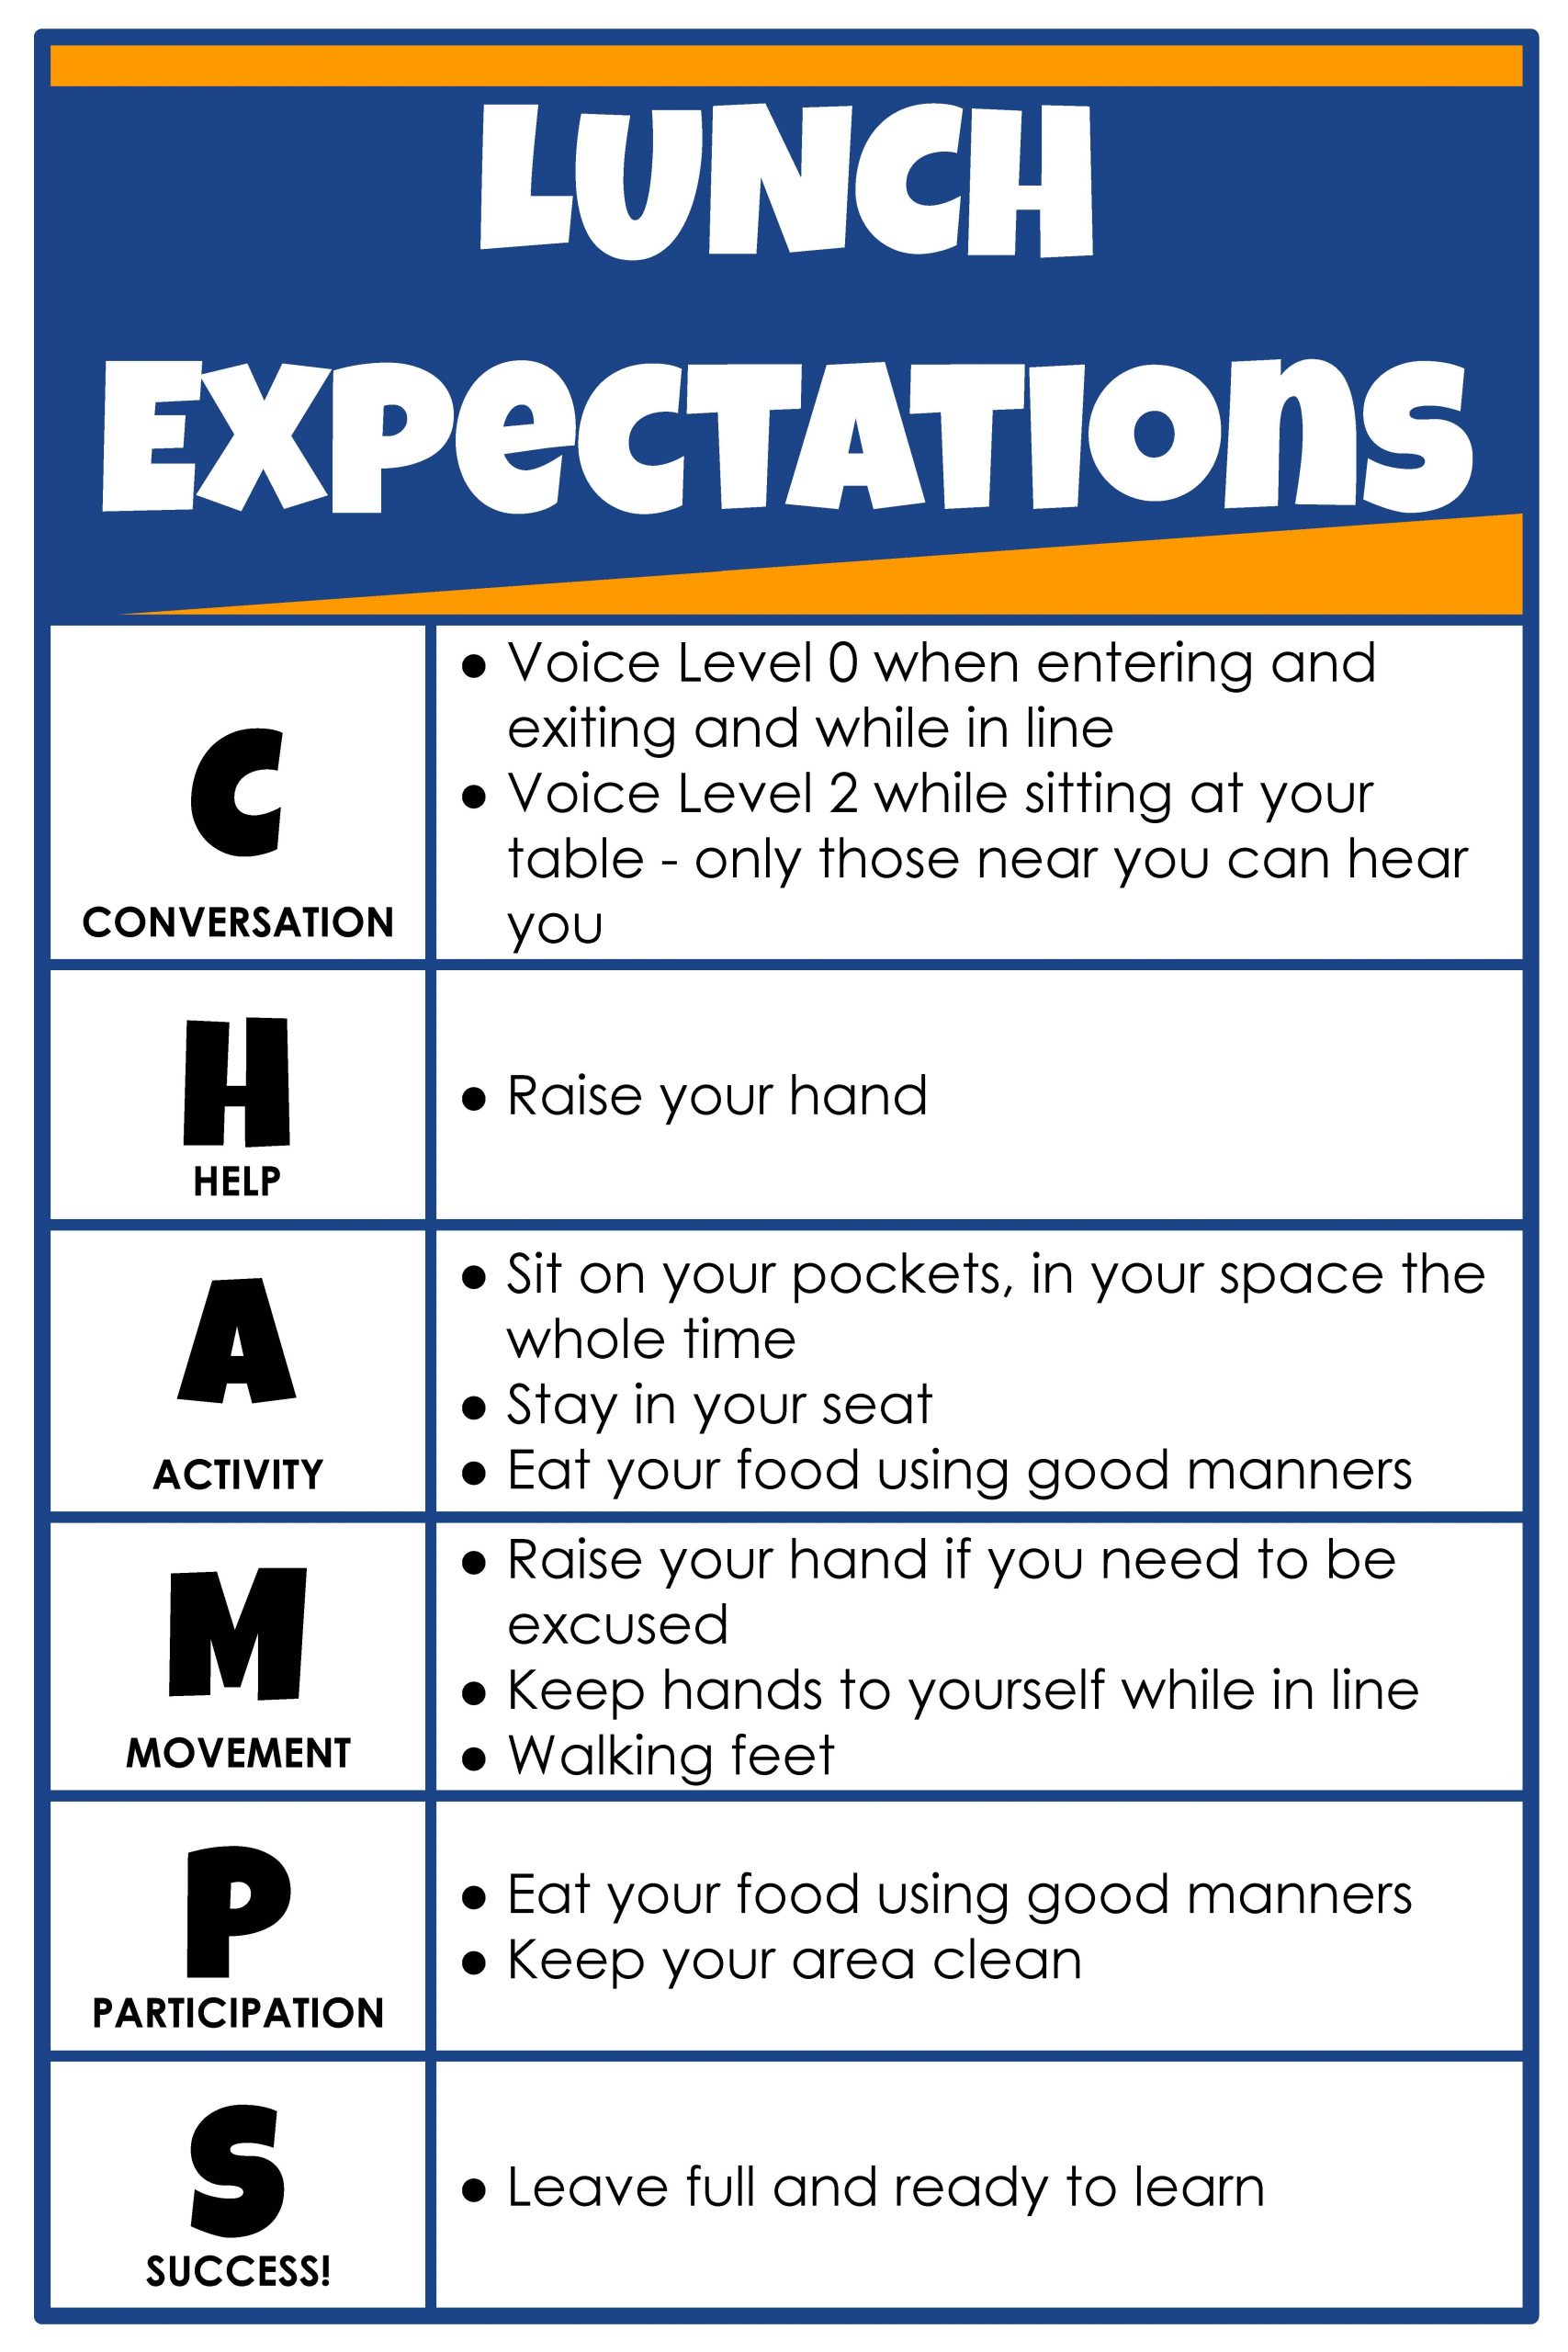 Lunch Expectations Poster